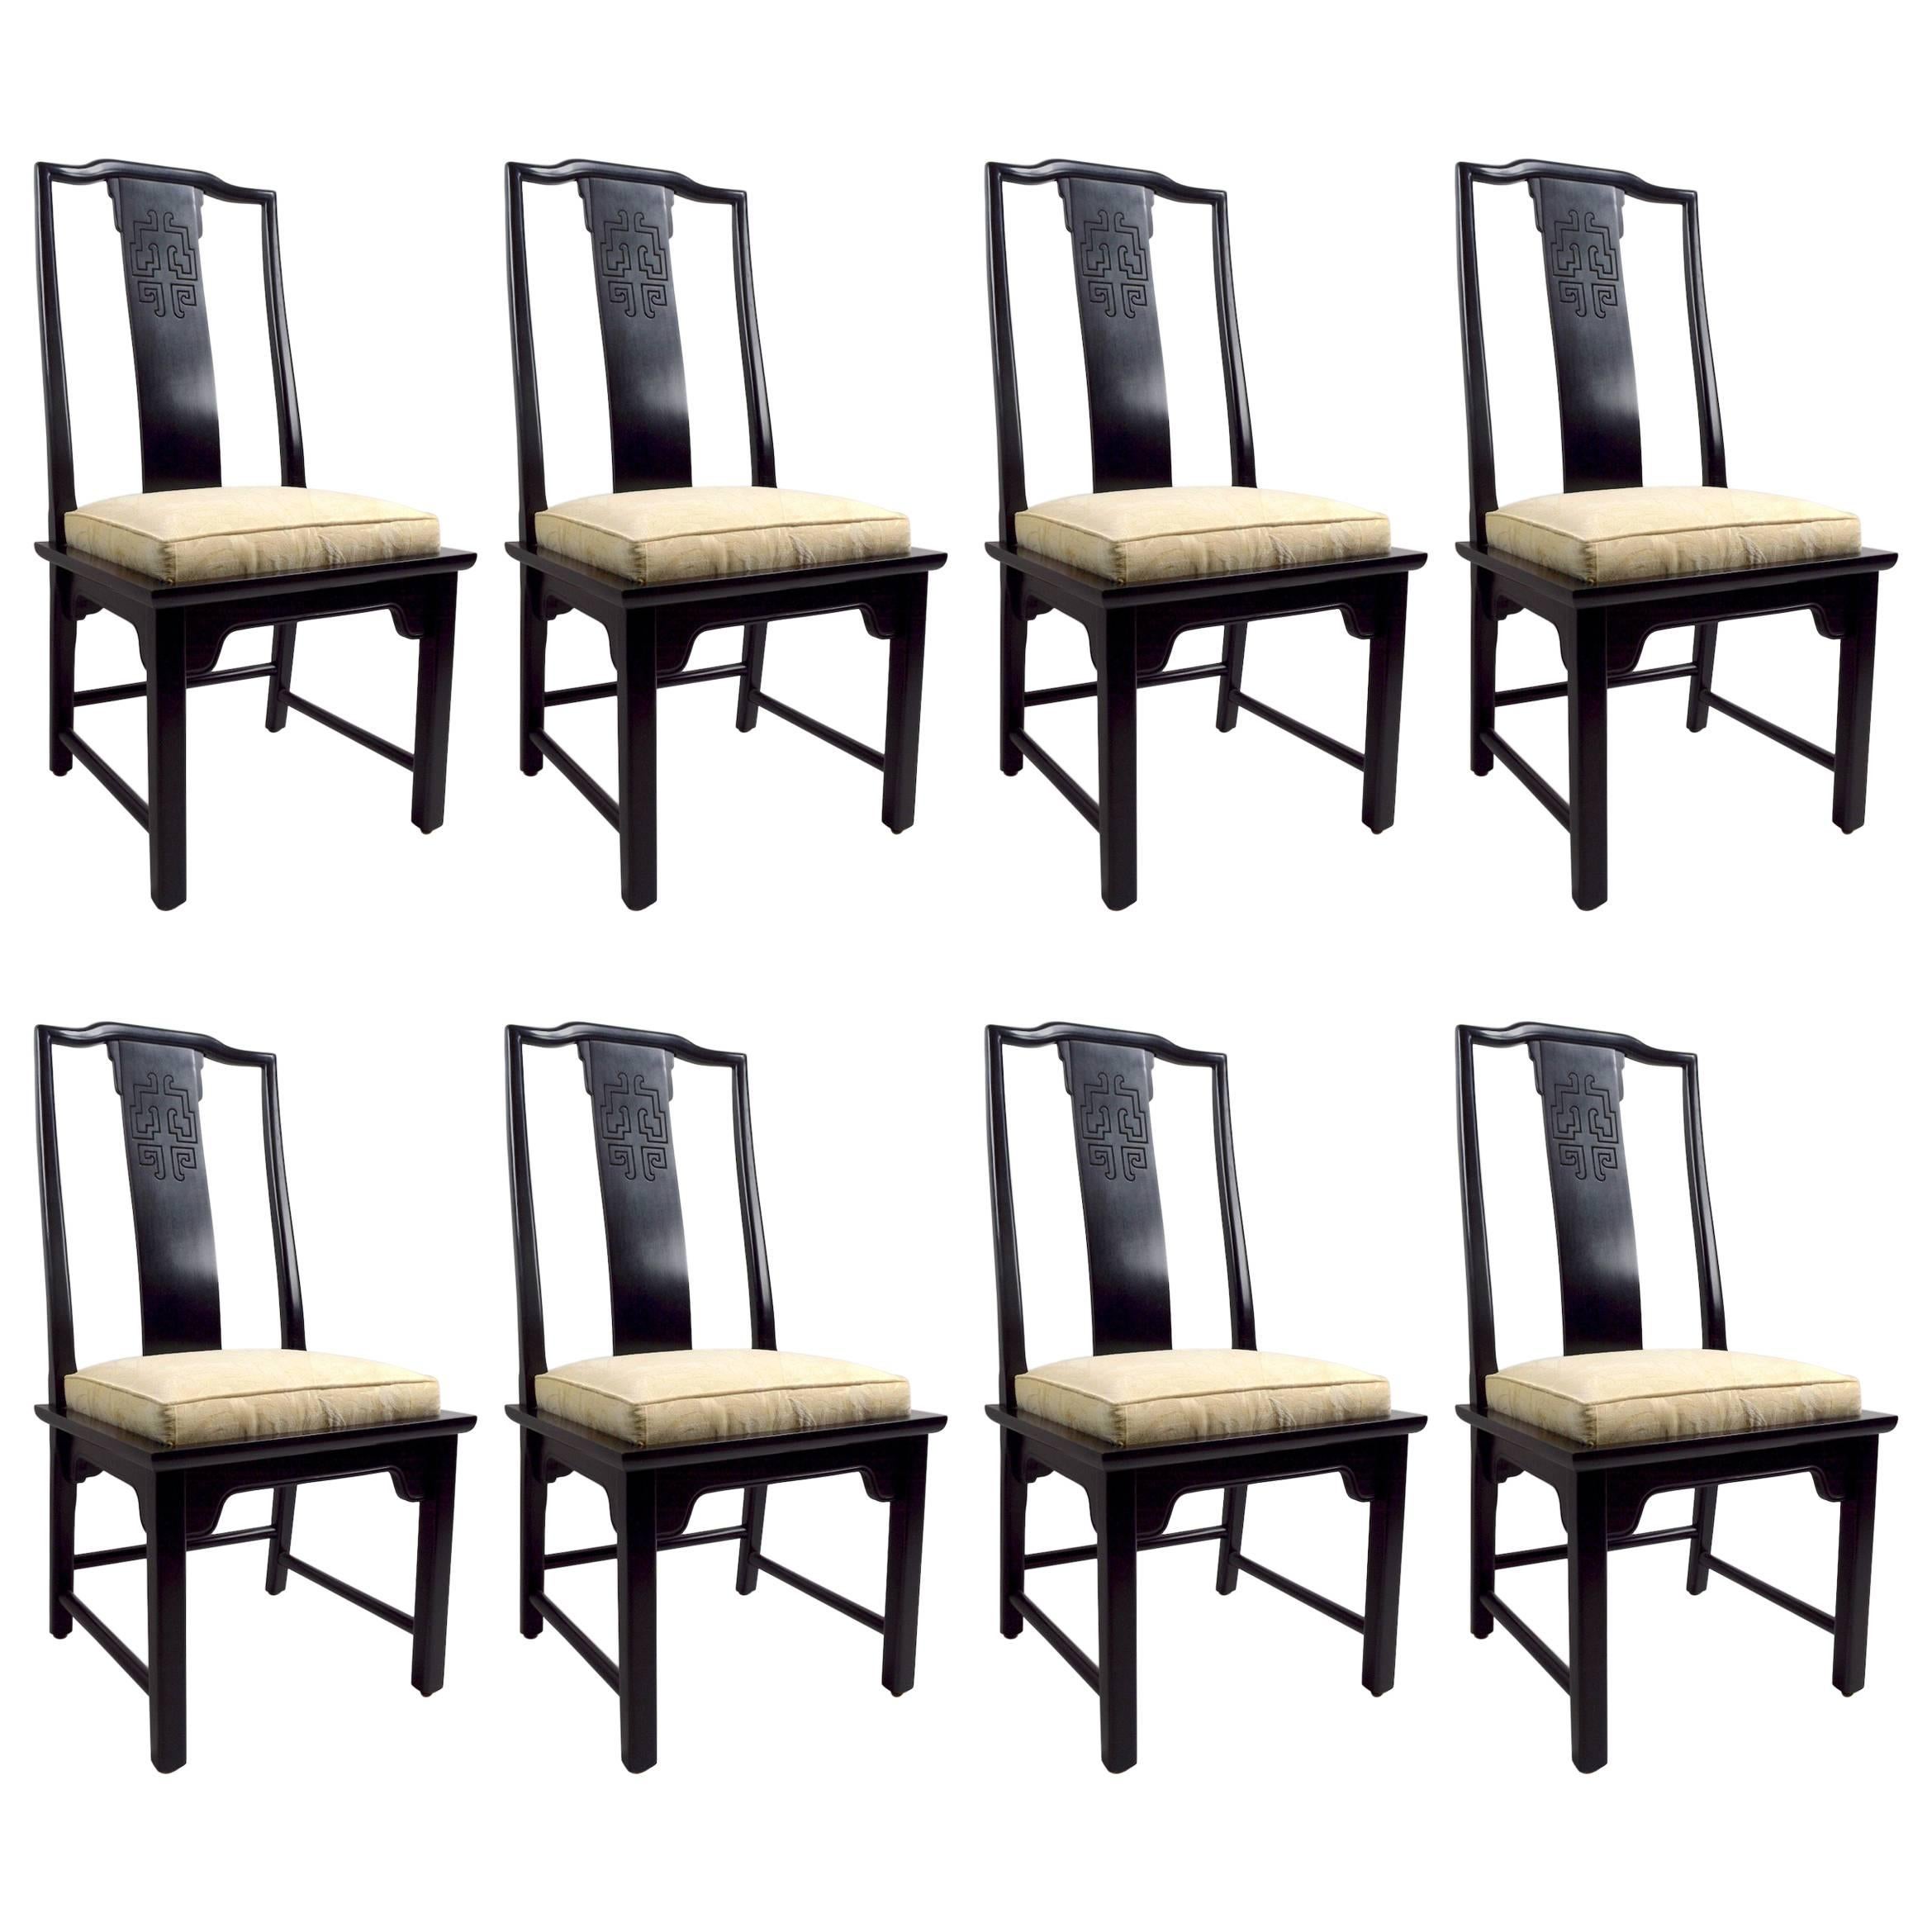 Set of Eight Chin Hua Dining Chairs in Black Lacquer Finish